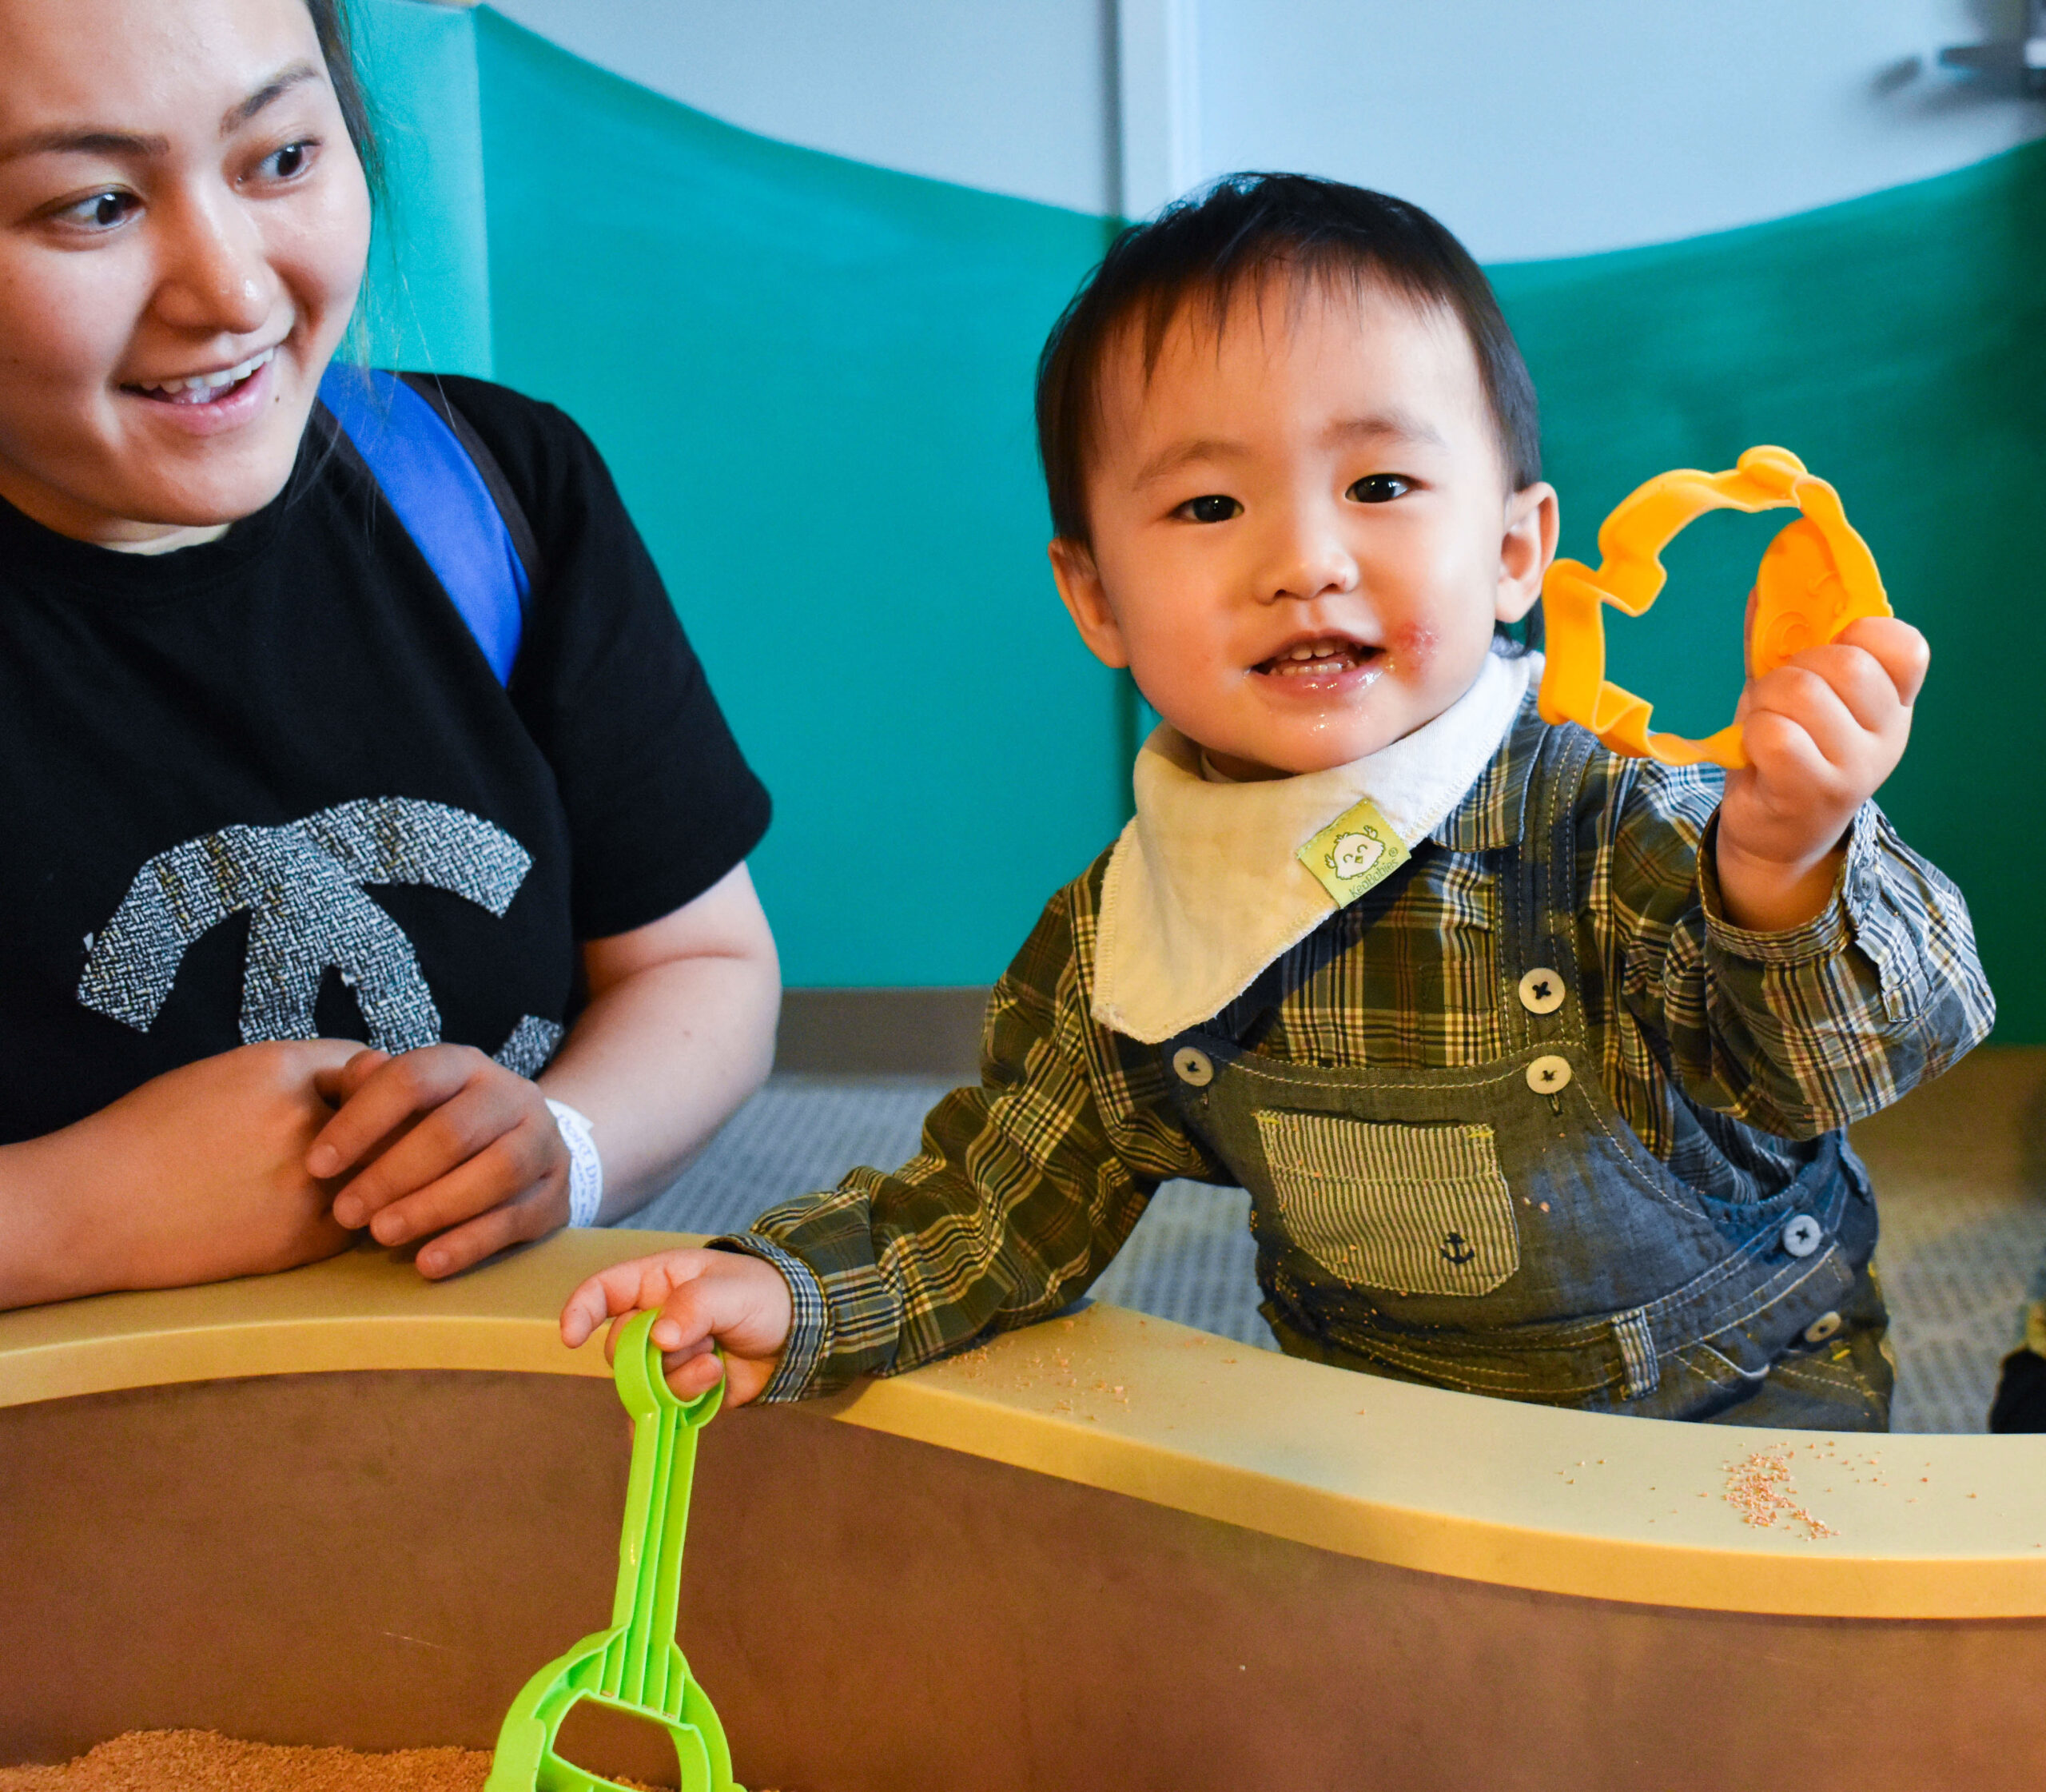 a toddler holding sandbox toy and smiling. Adult woman is smiling at the child.